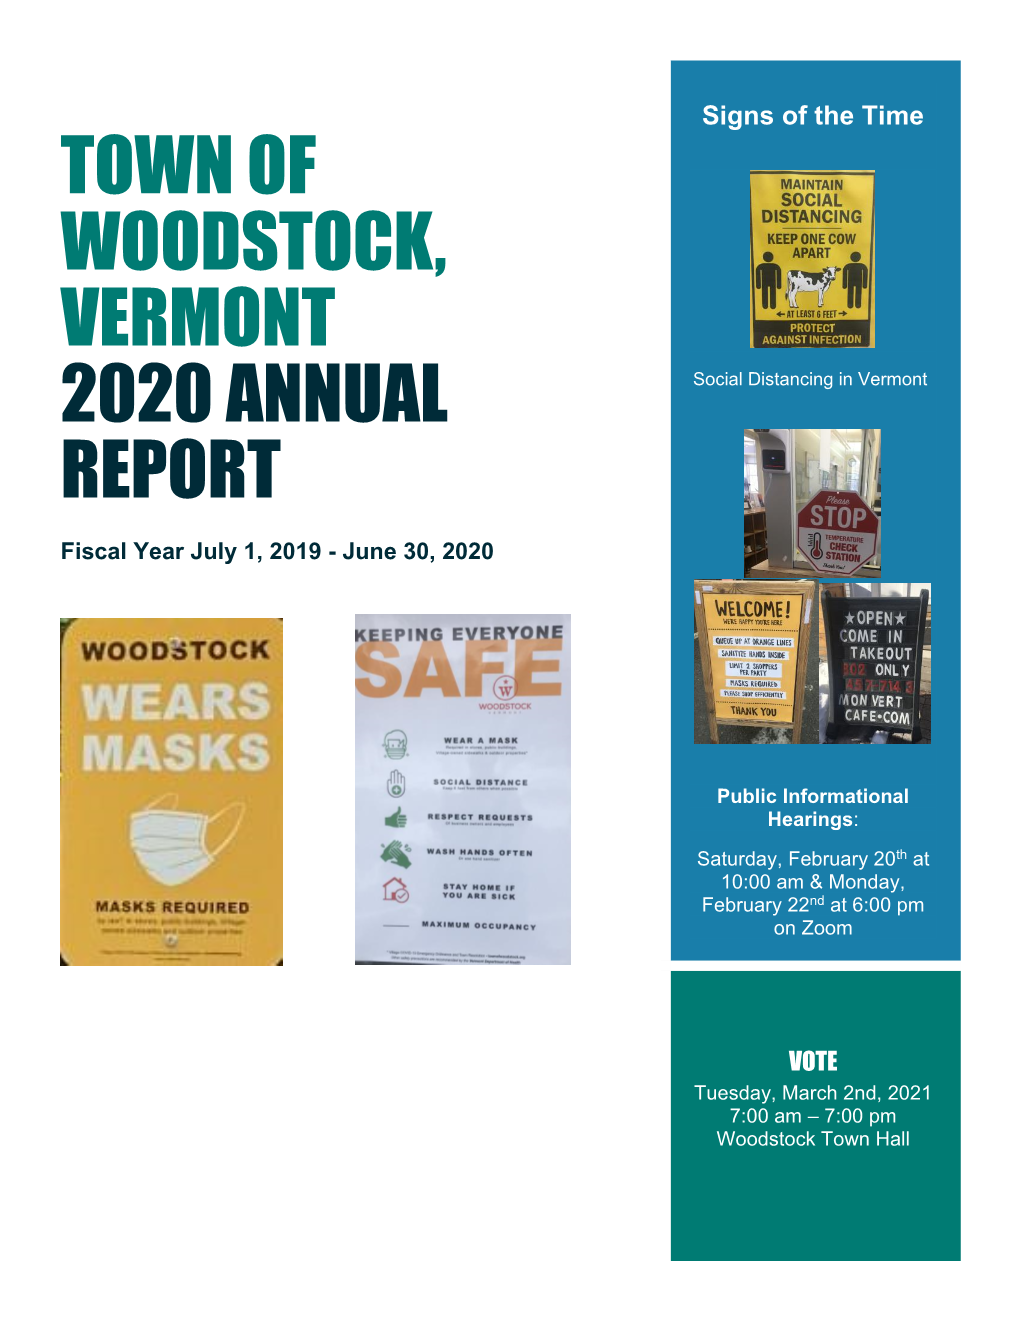 Town of Woodstock, Vermont 2020 Annual Report